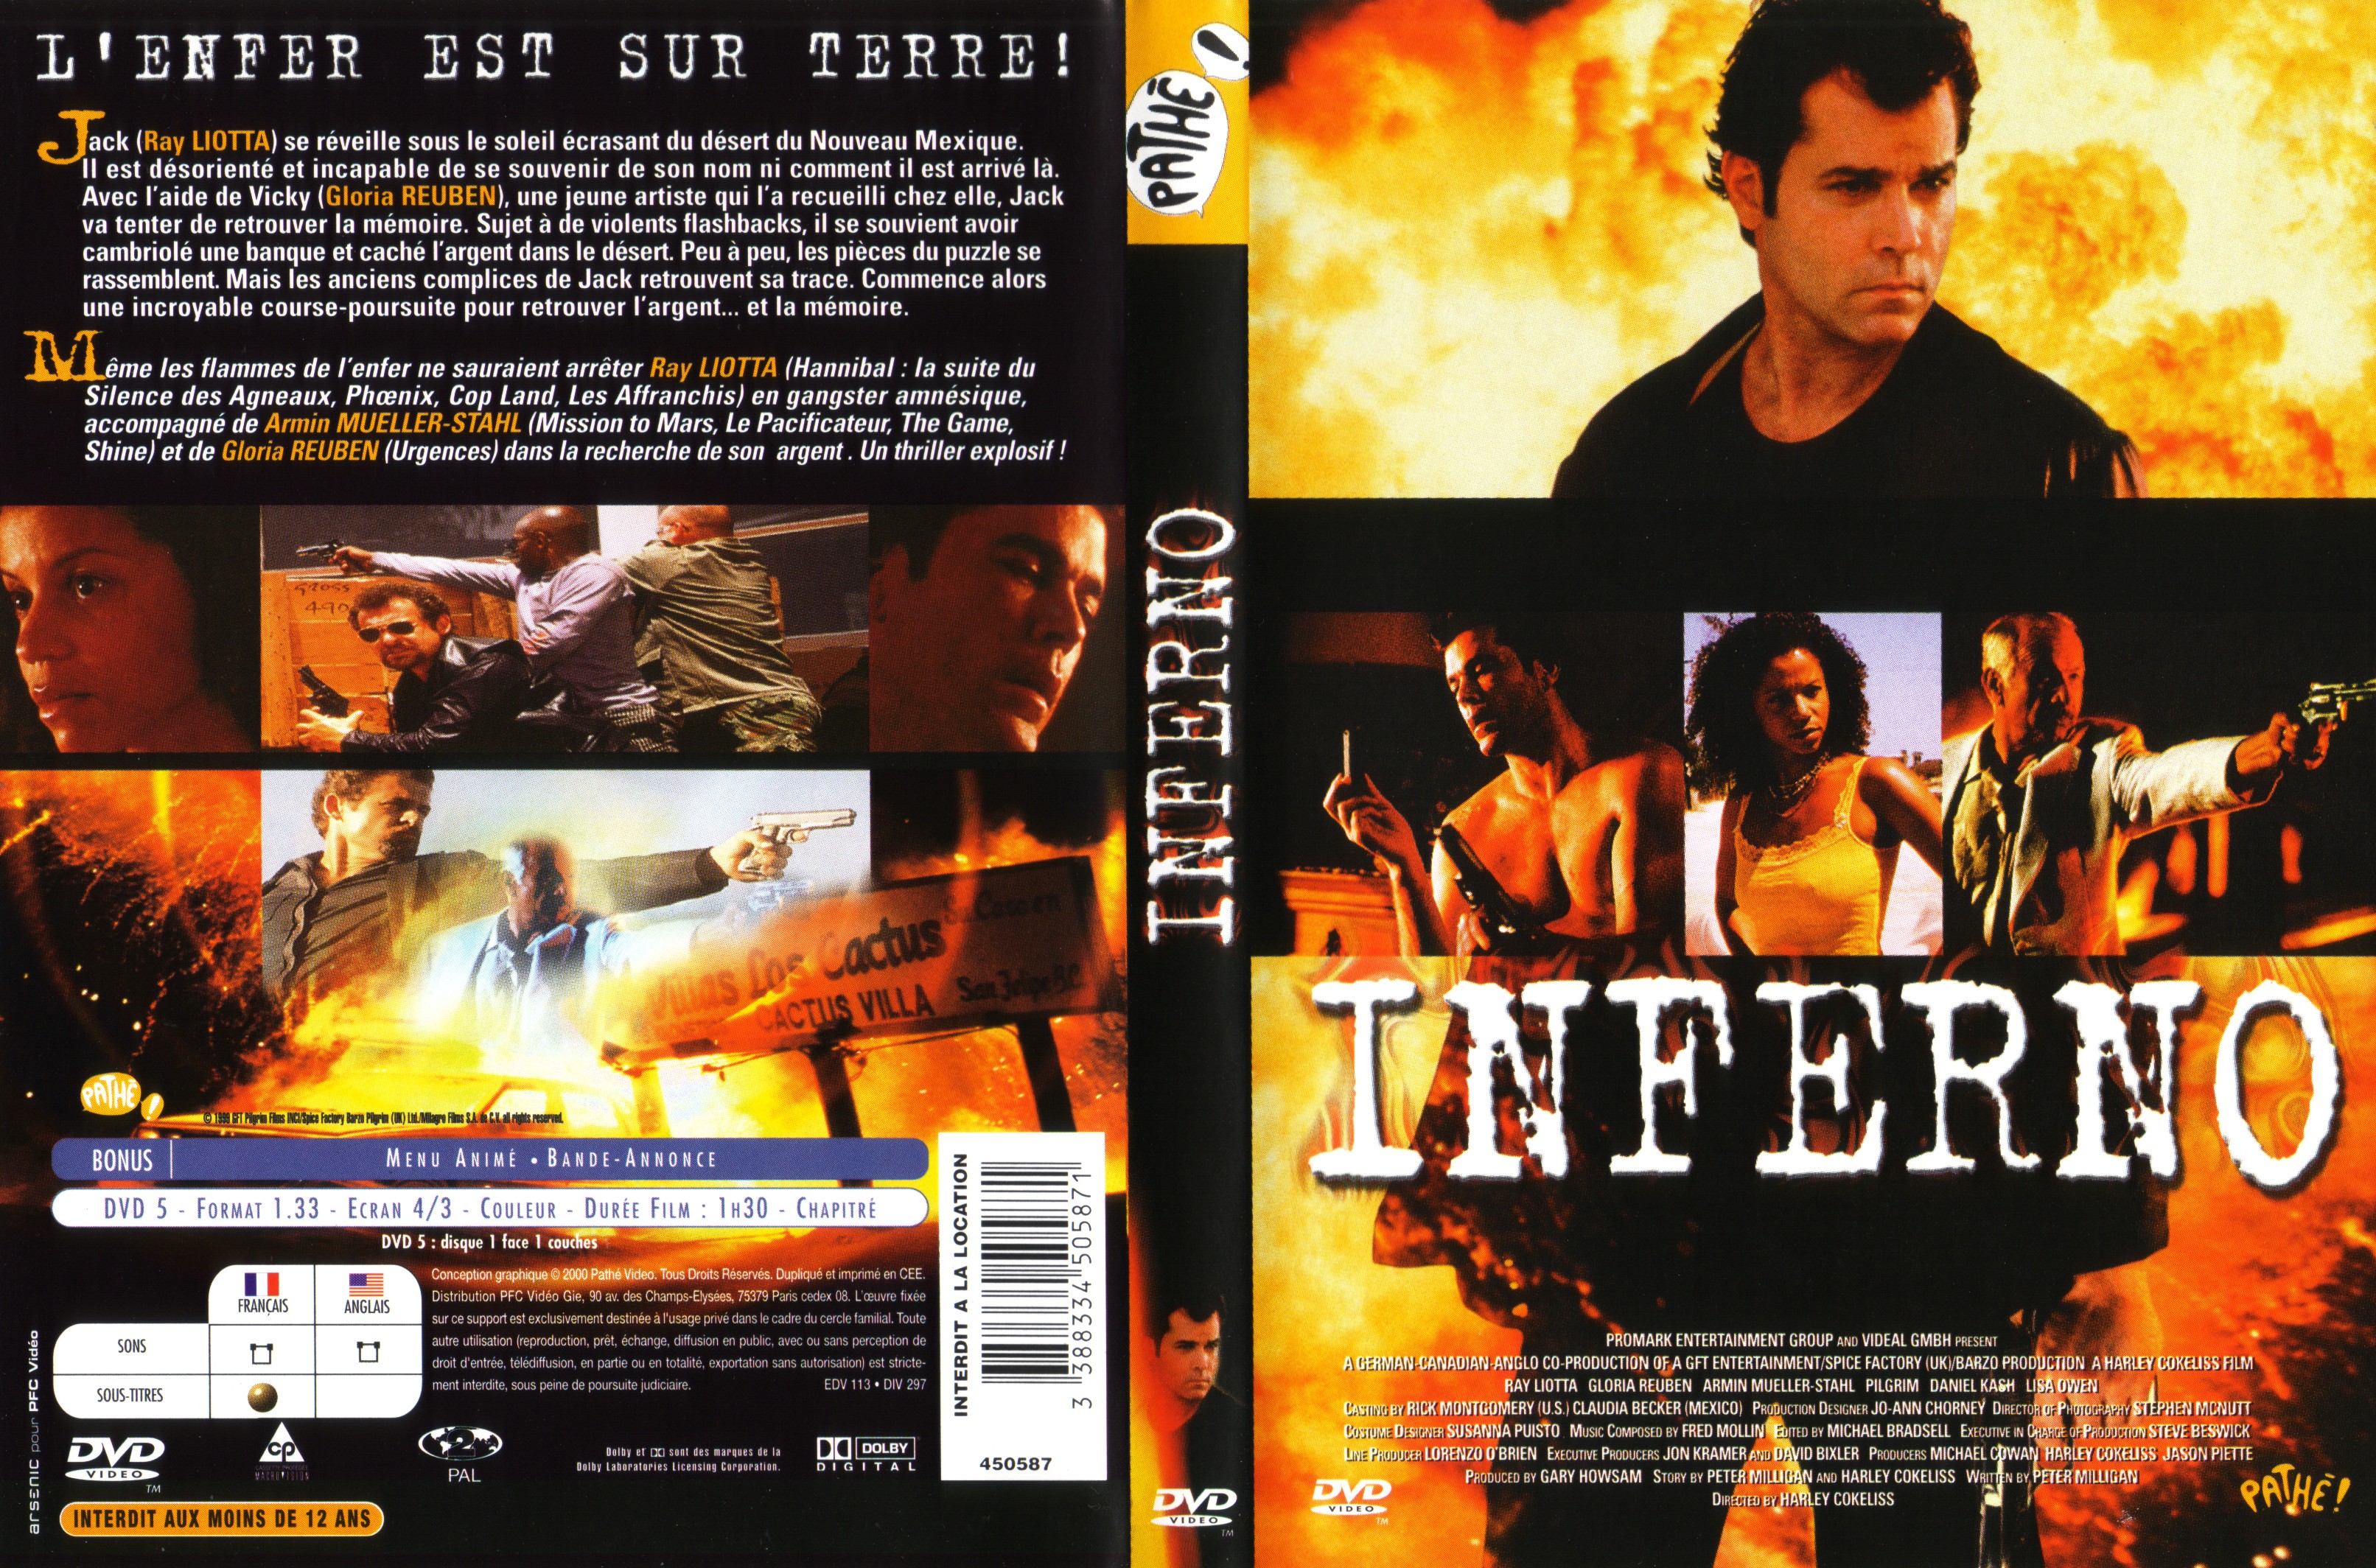 Jaquette DVD Inferno (Ray Liotta)